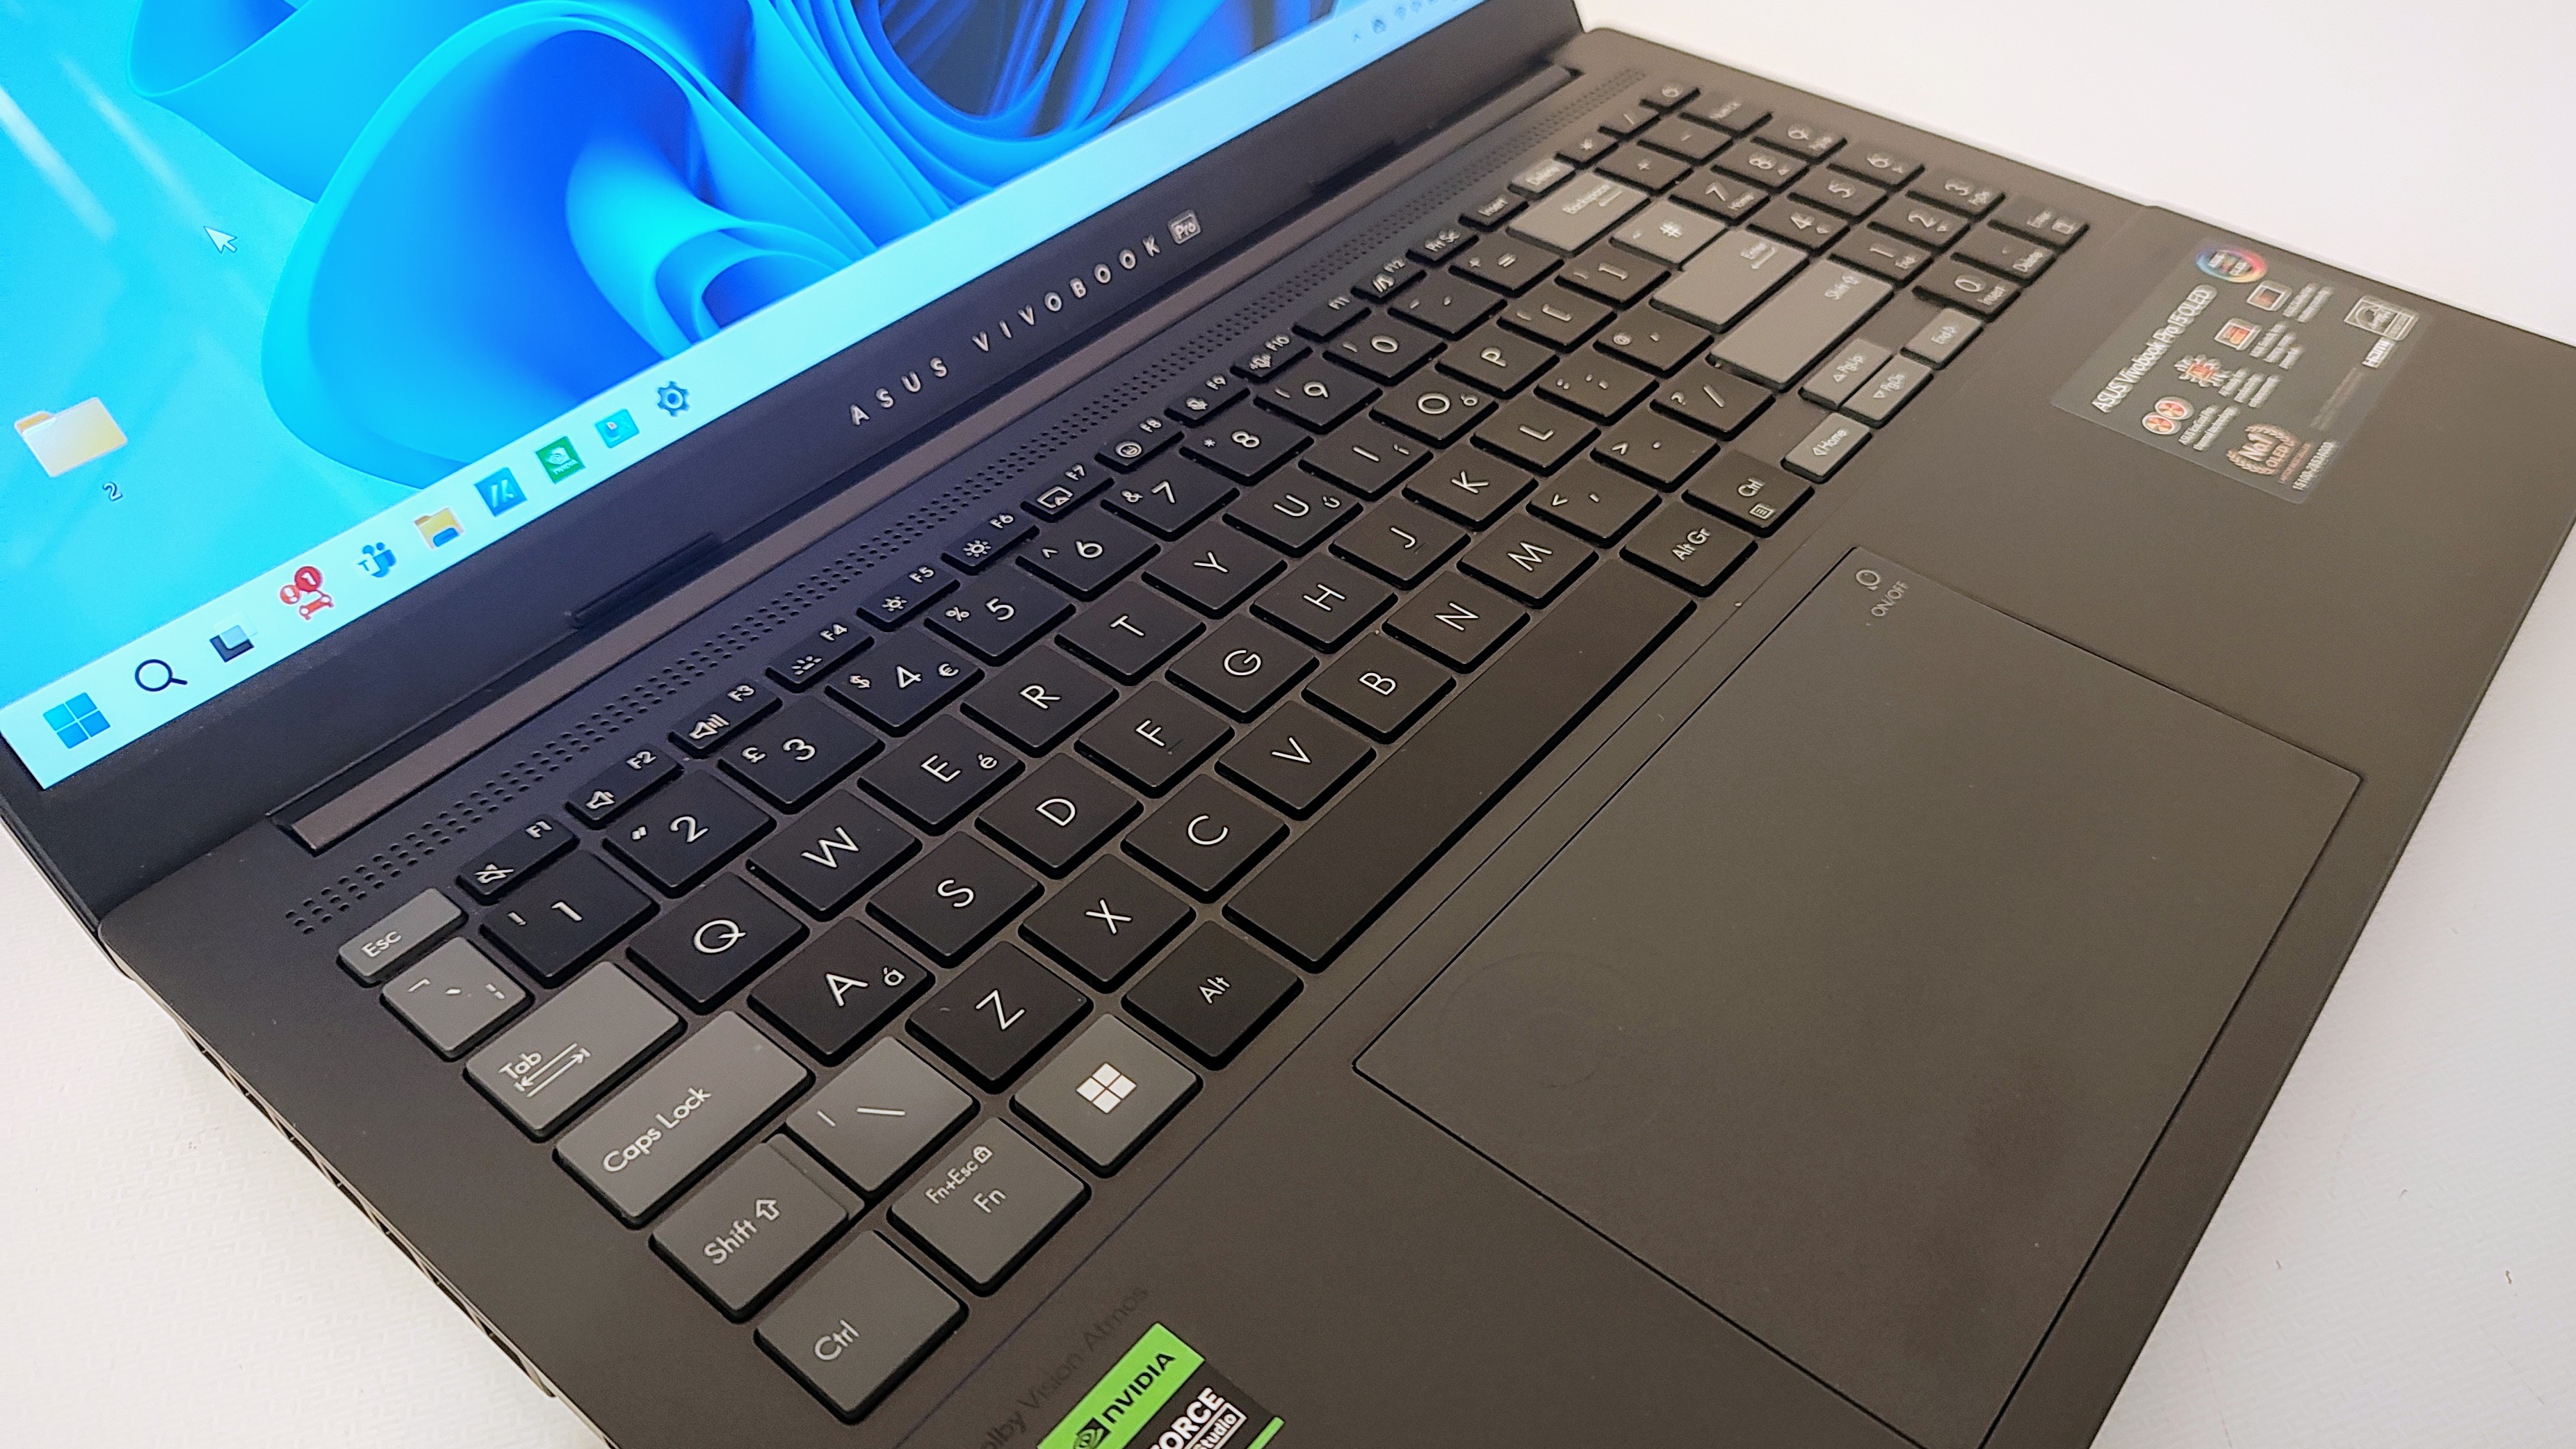 The keyboard and touchpad on the Asus Vivobook Pro 15